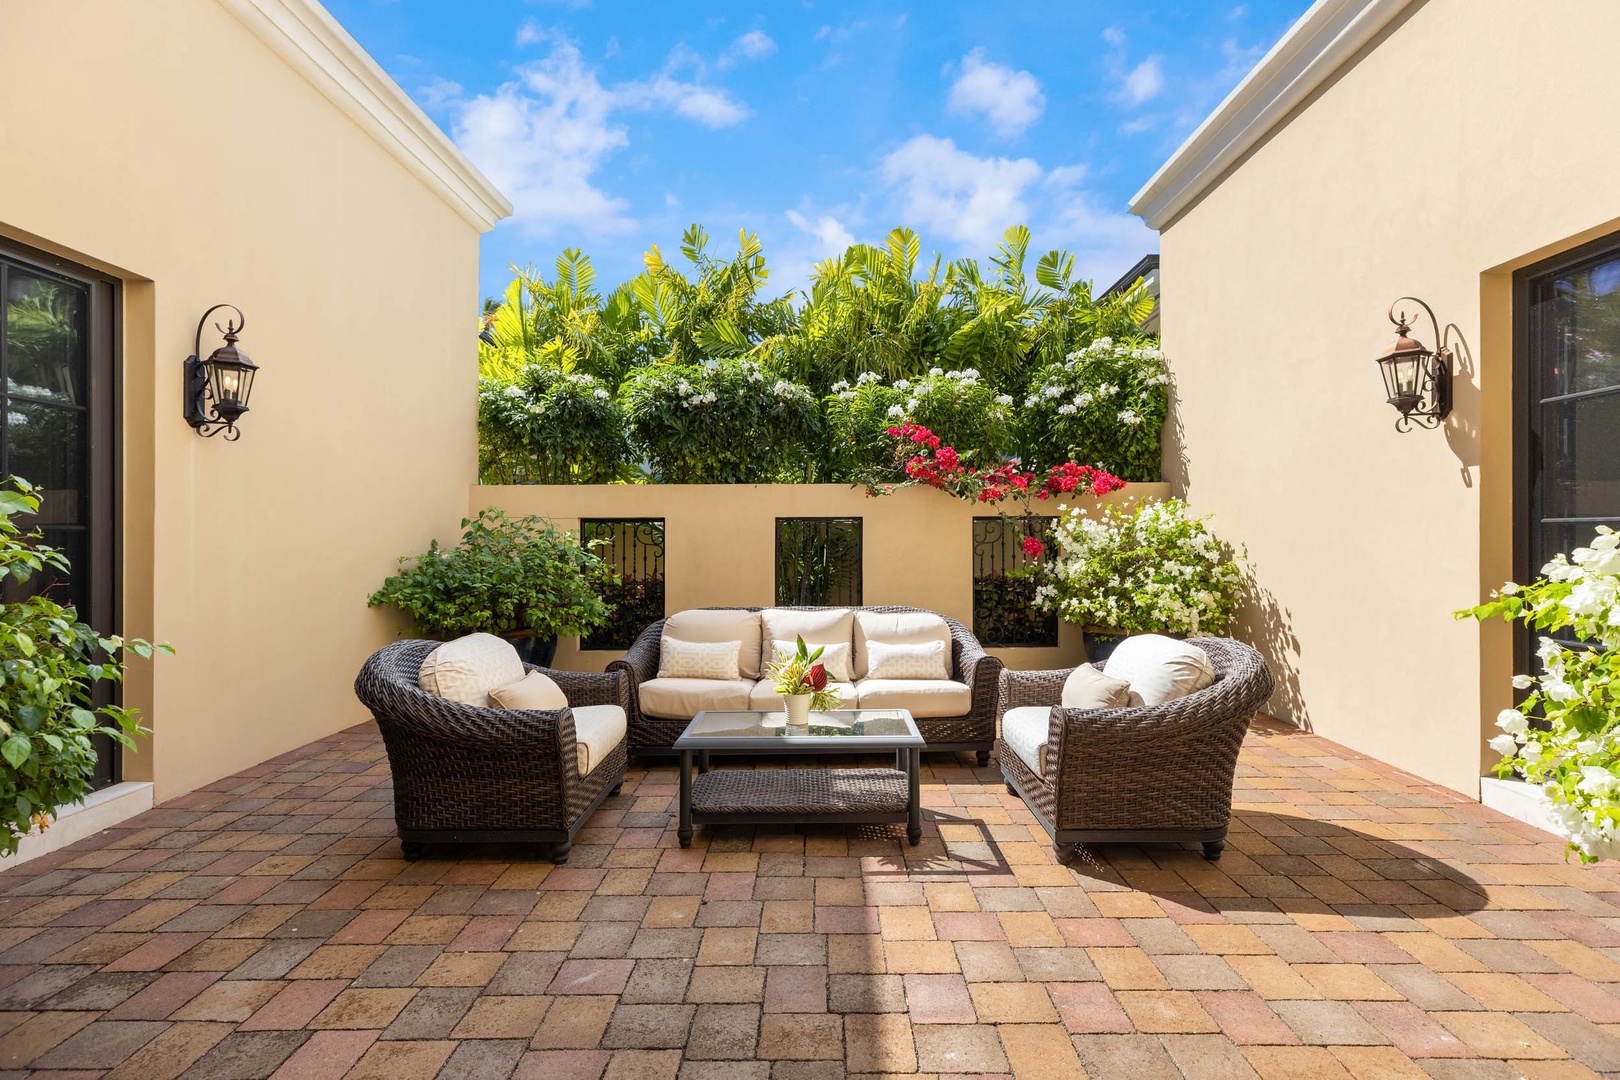 Honolulu Vacation Rentals, Royal Kahala Estate - Lounge area right off the courtyard.